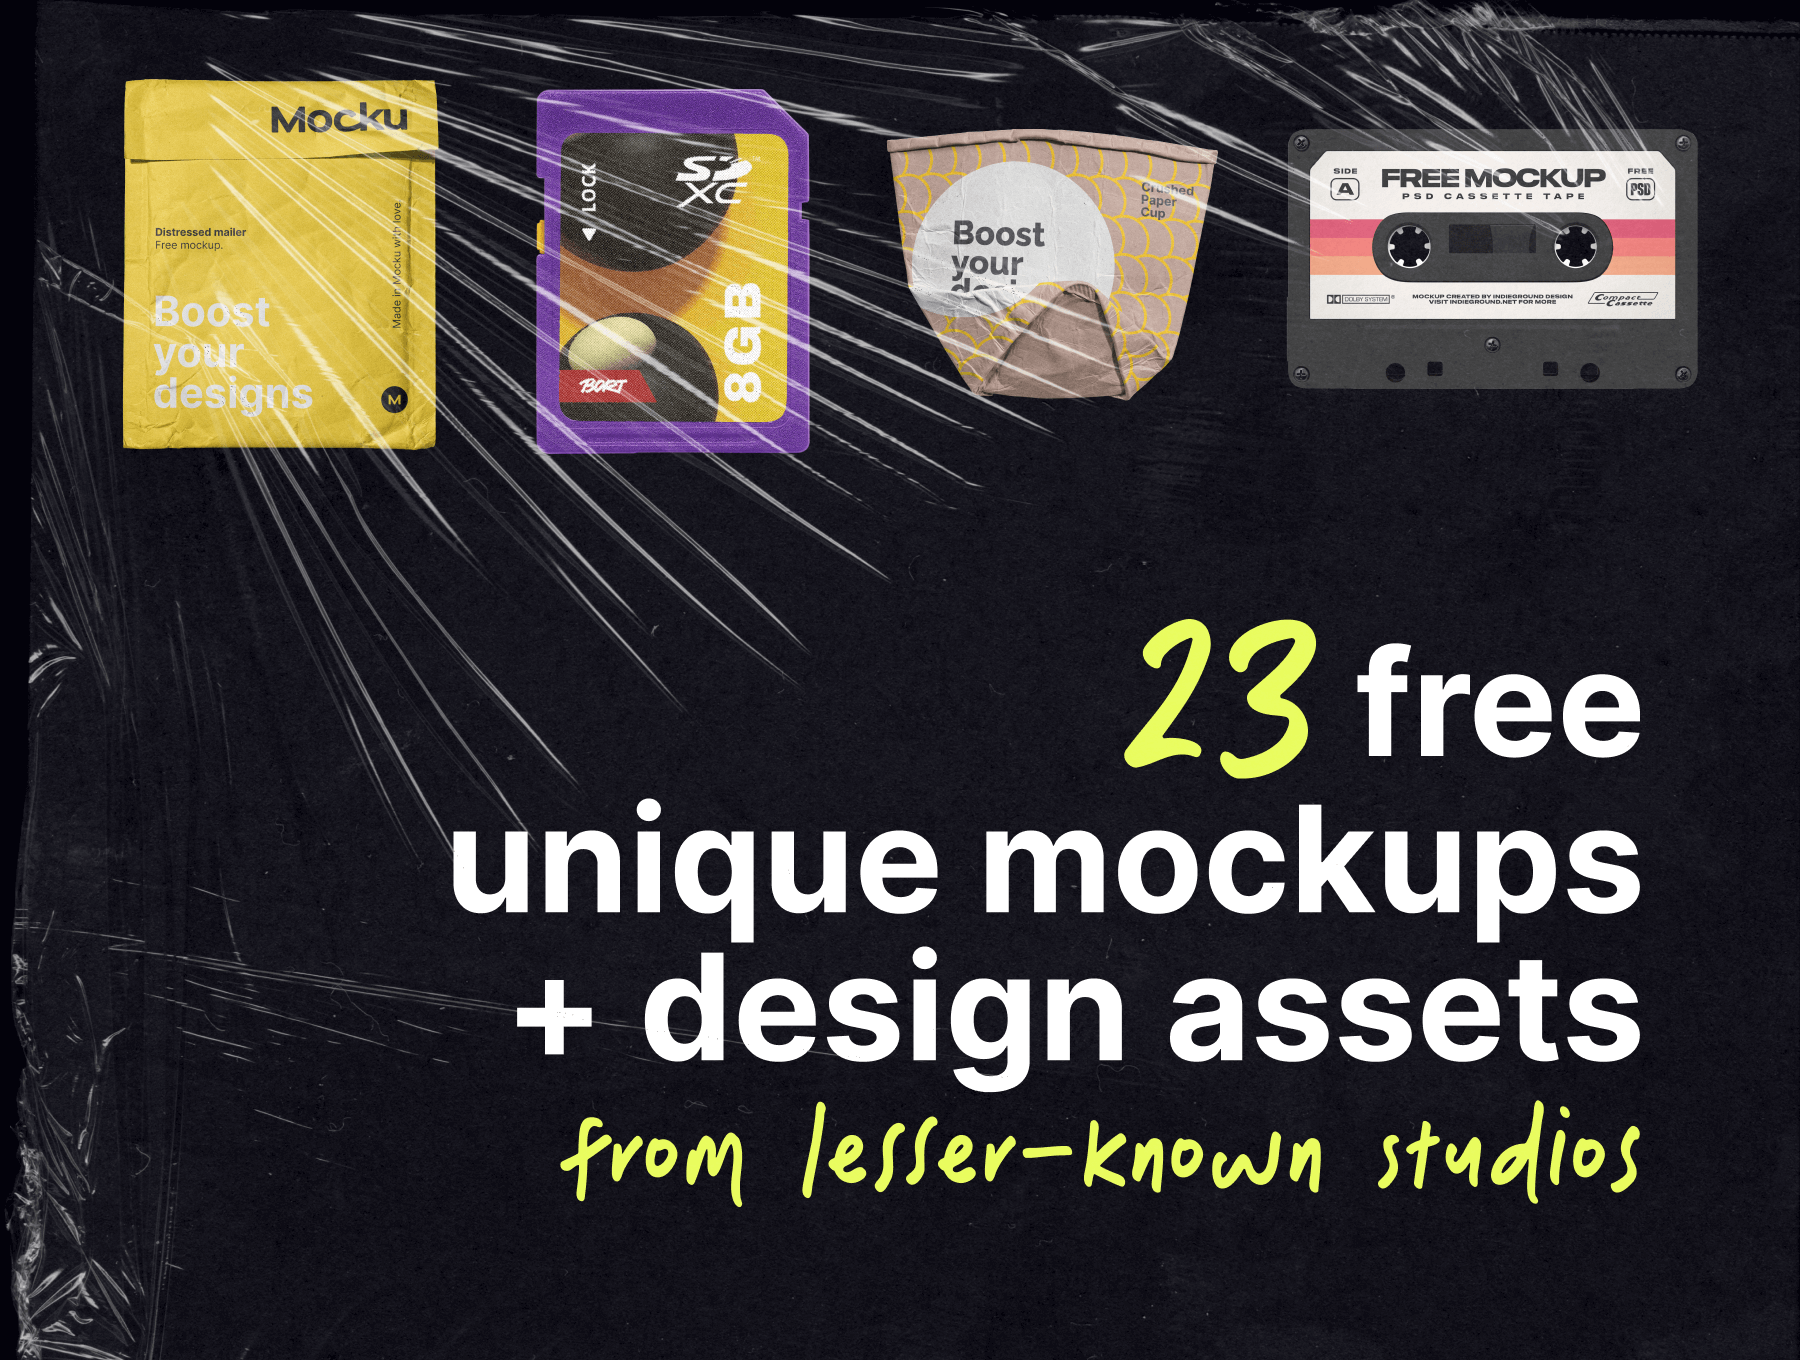 23 free unique mockups and design assets from lesser-known studios